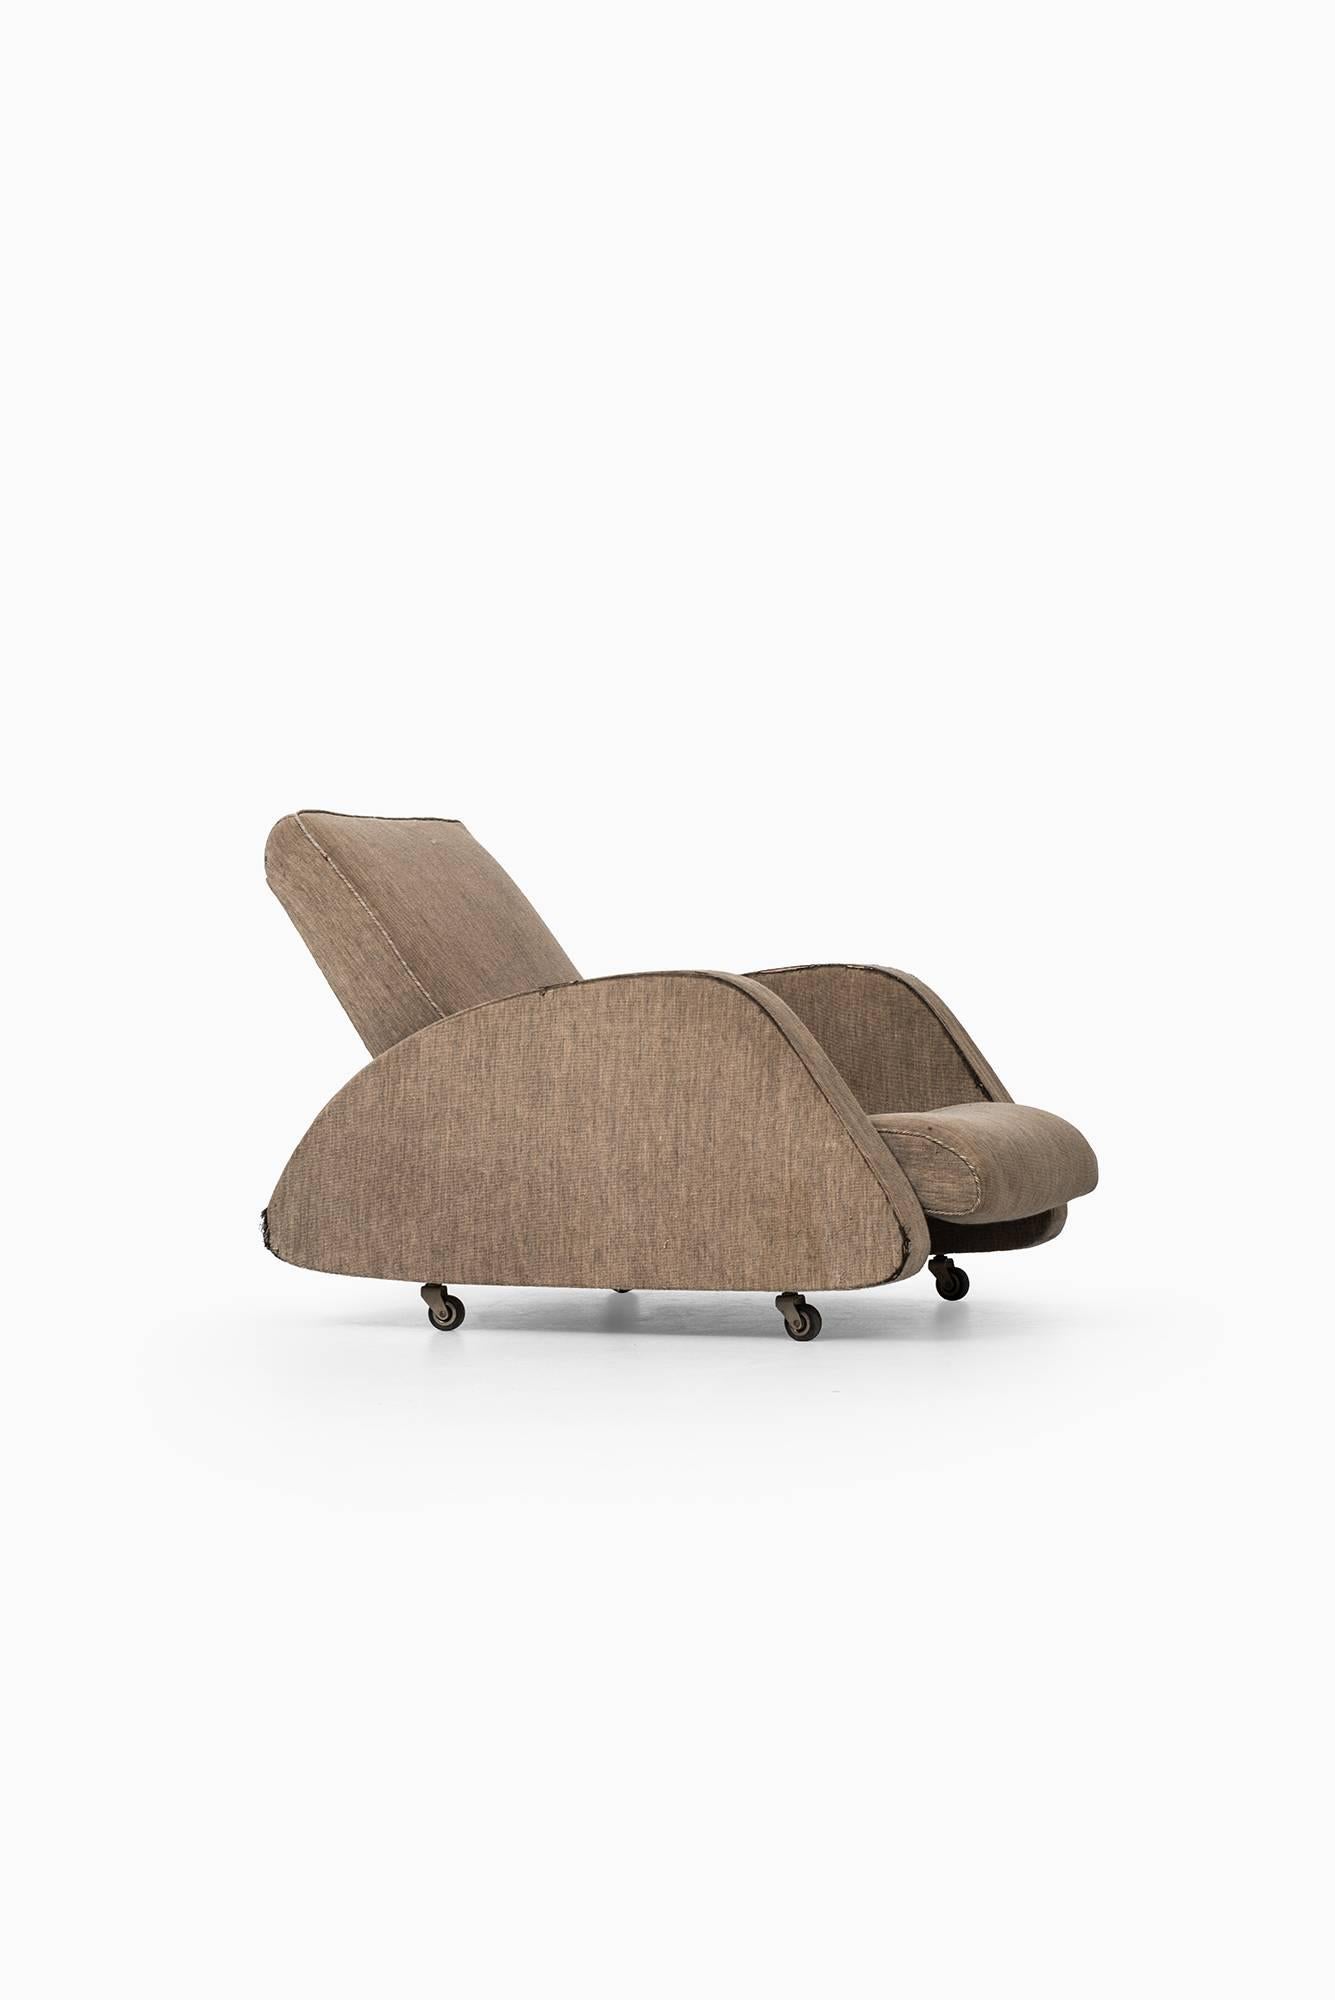 Rare easy chair designed by Bo Wretling. Produced by Otto Wretling in Umeå, Sweden.